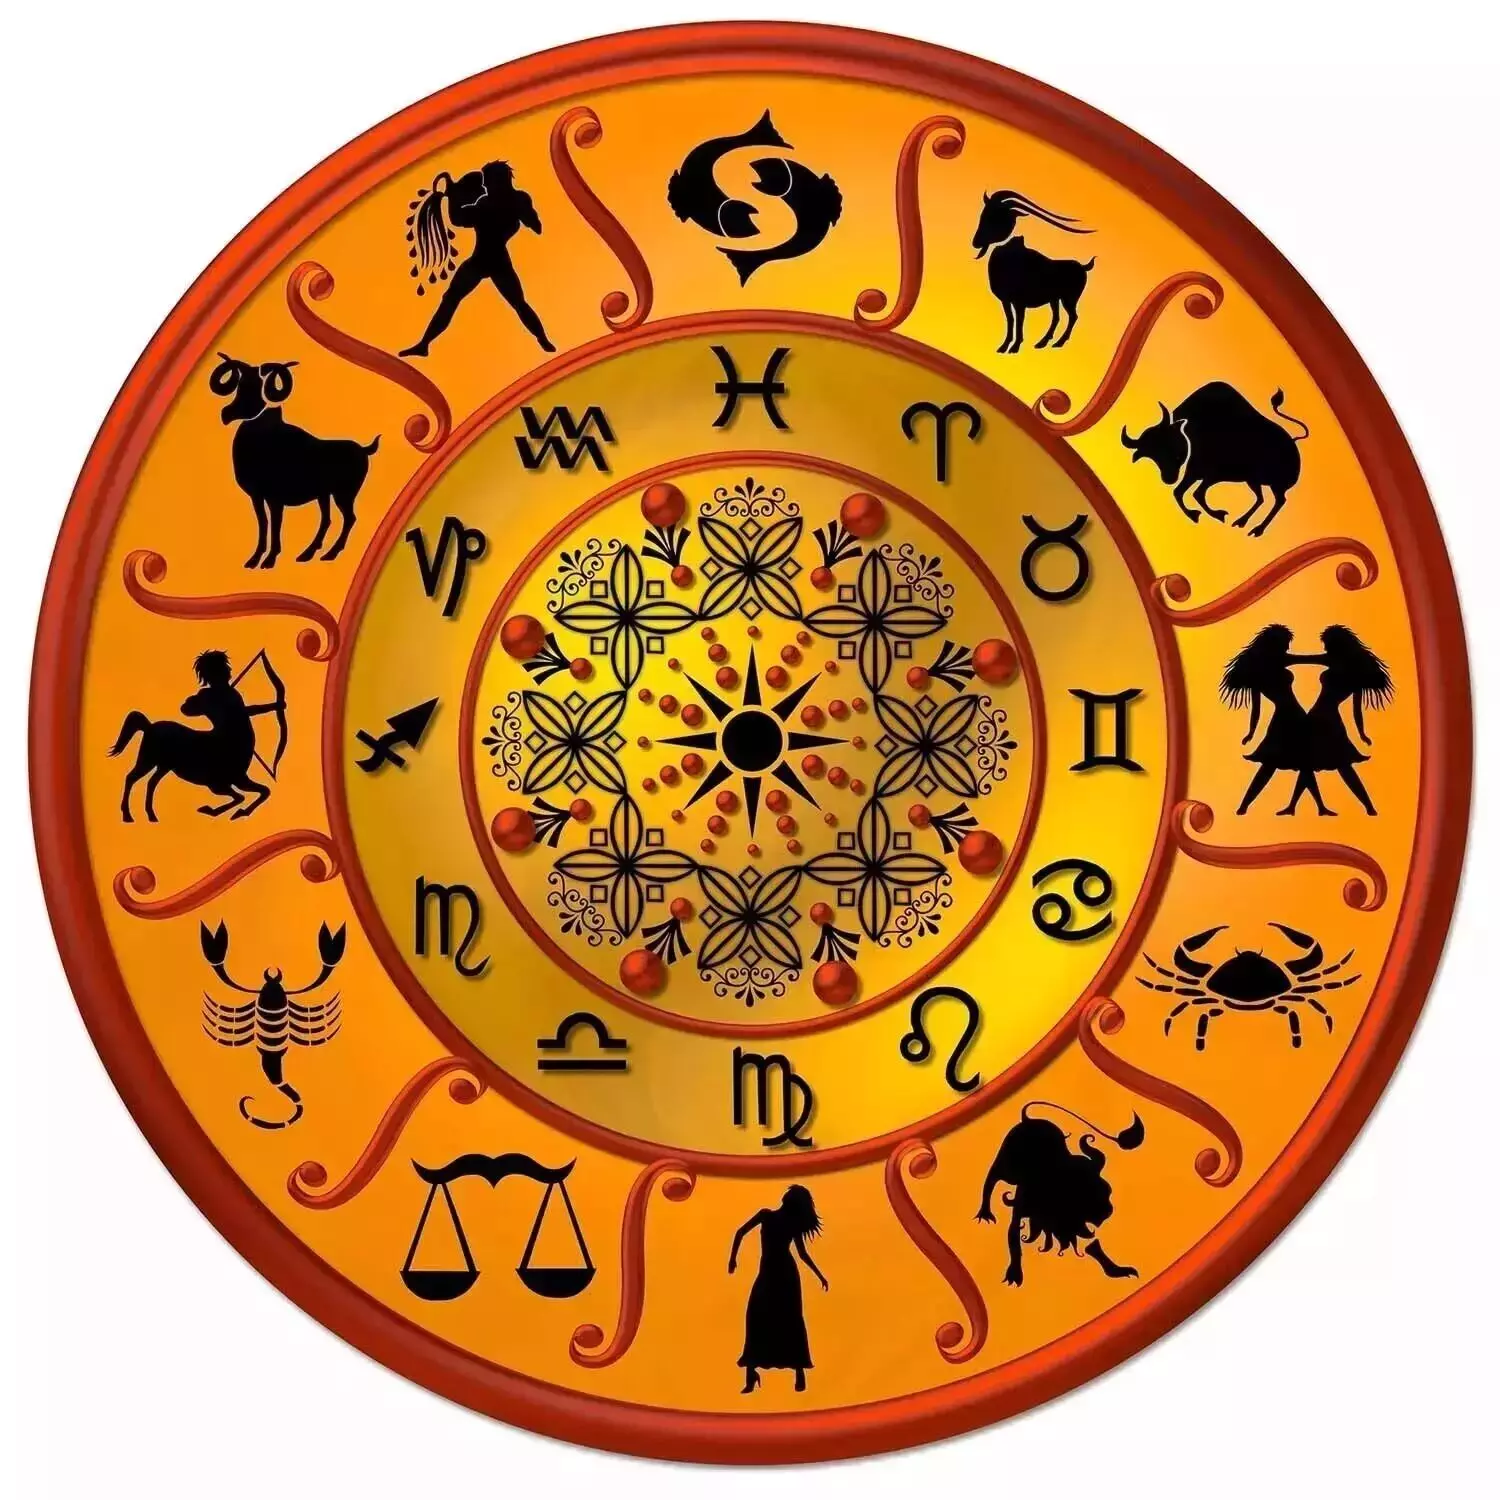 17 September – Know your todays horoscope